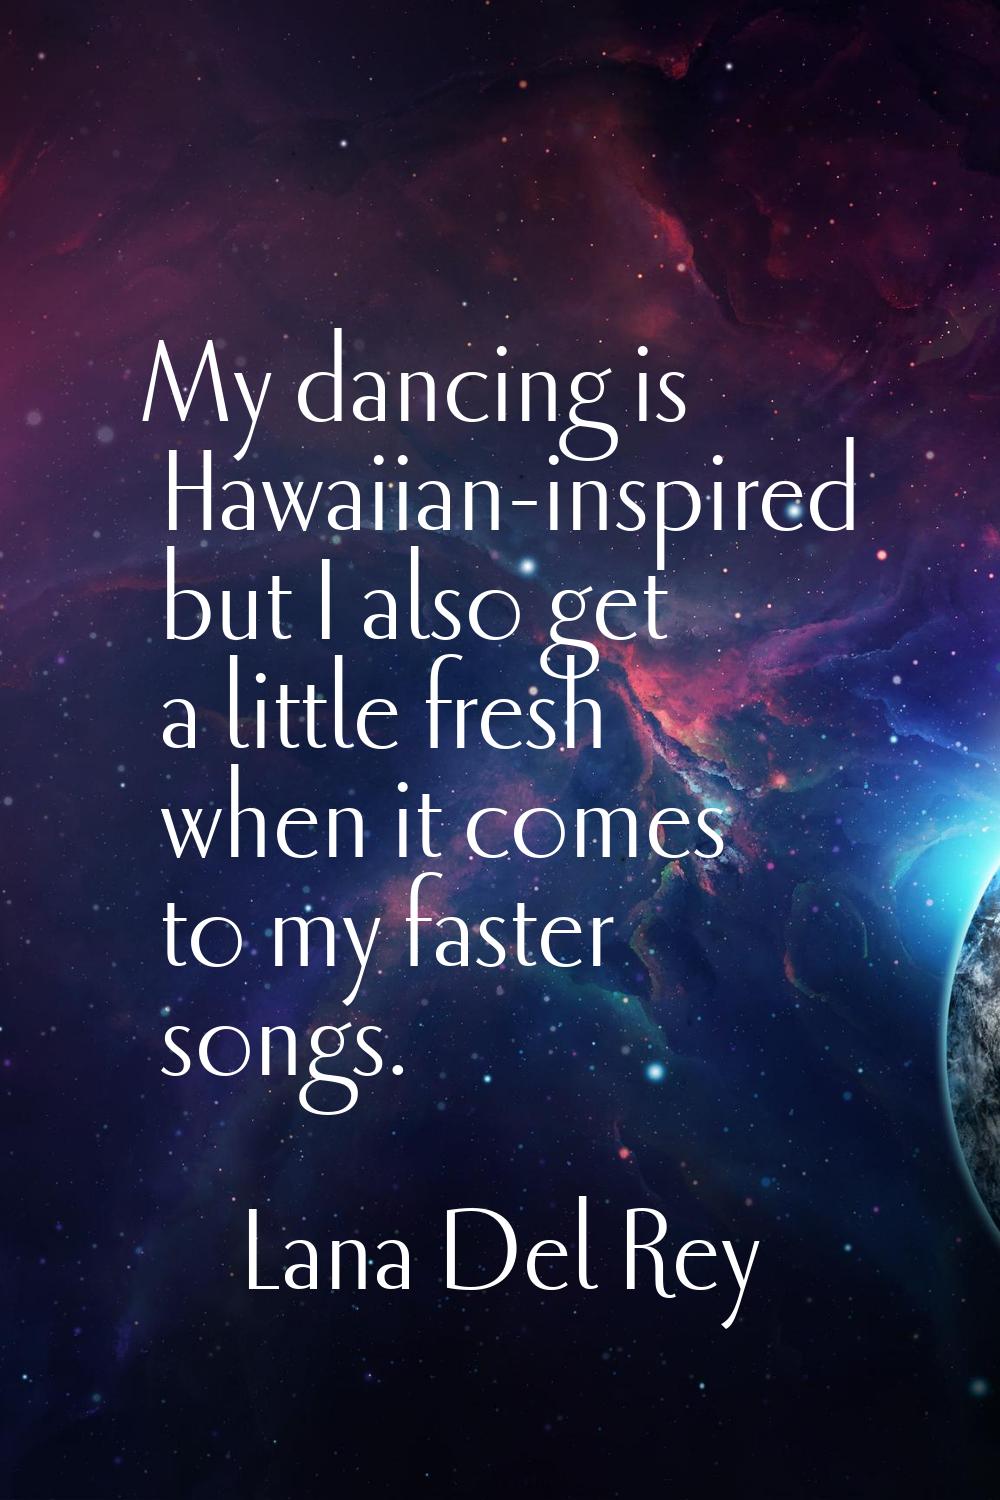 My dancing is Hawaiian-inspired but I also get a little fresh when it comes to my faster songs.